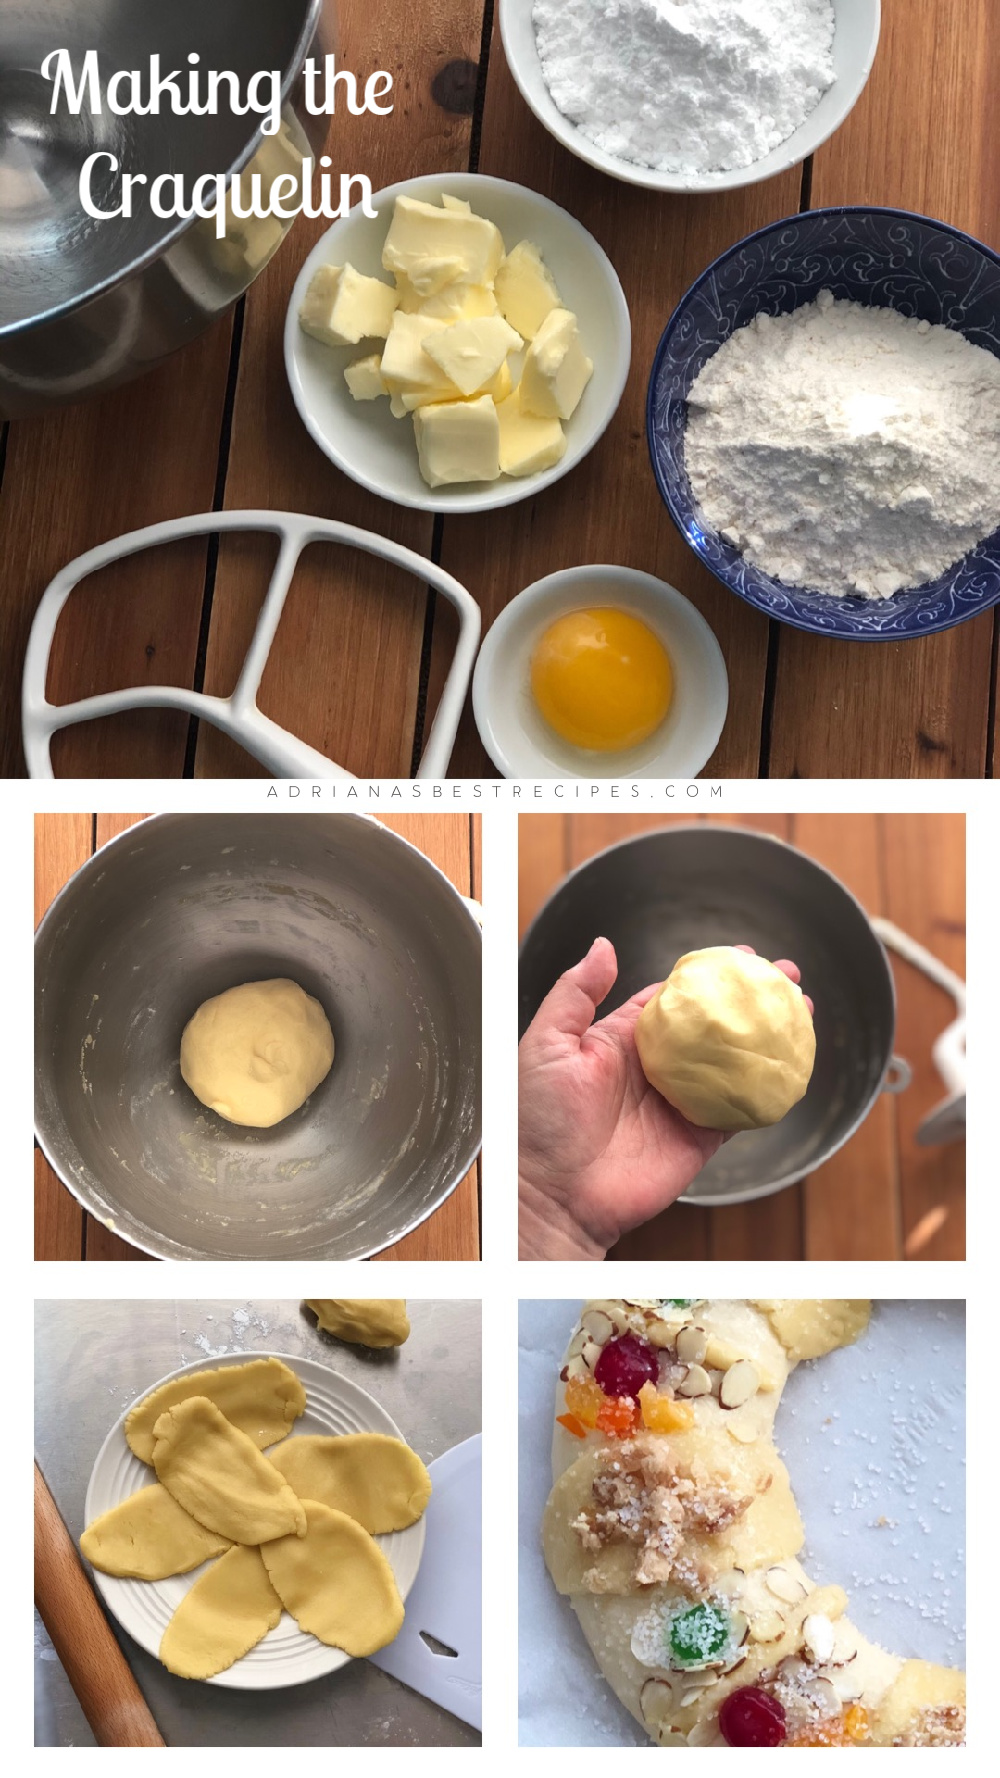 The craquelin has butter, confectioners sugar, flour, and good a yolk at room temperature